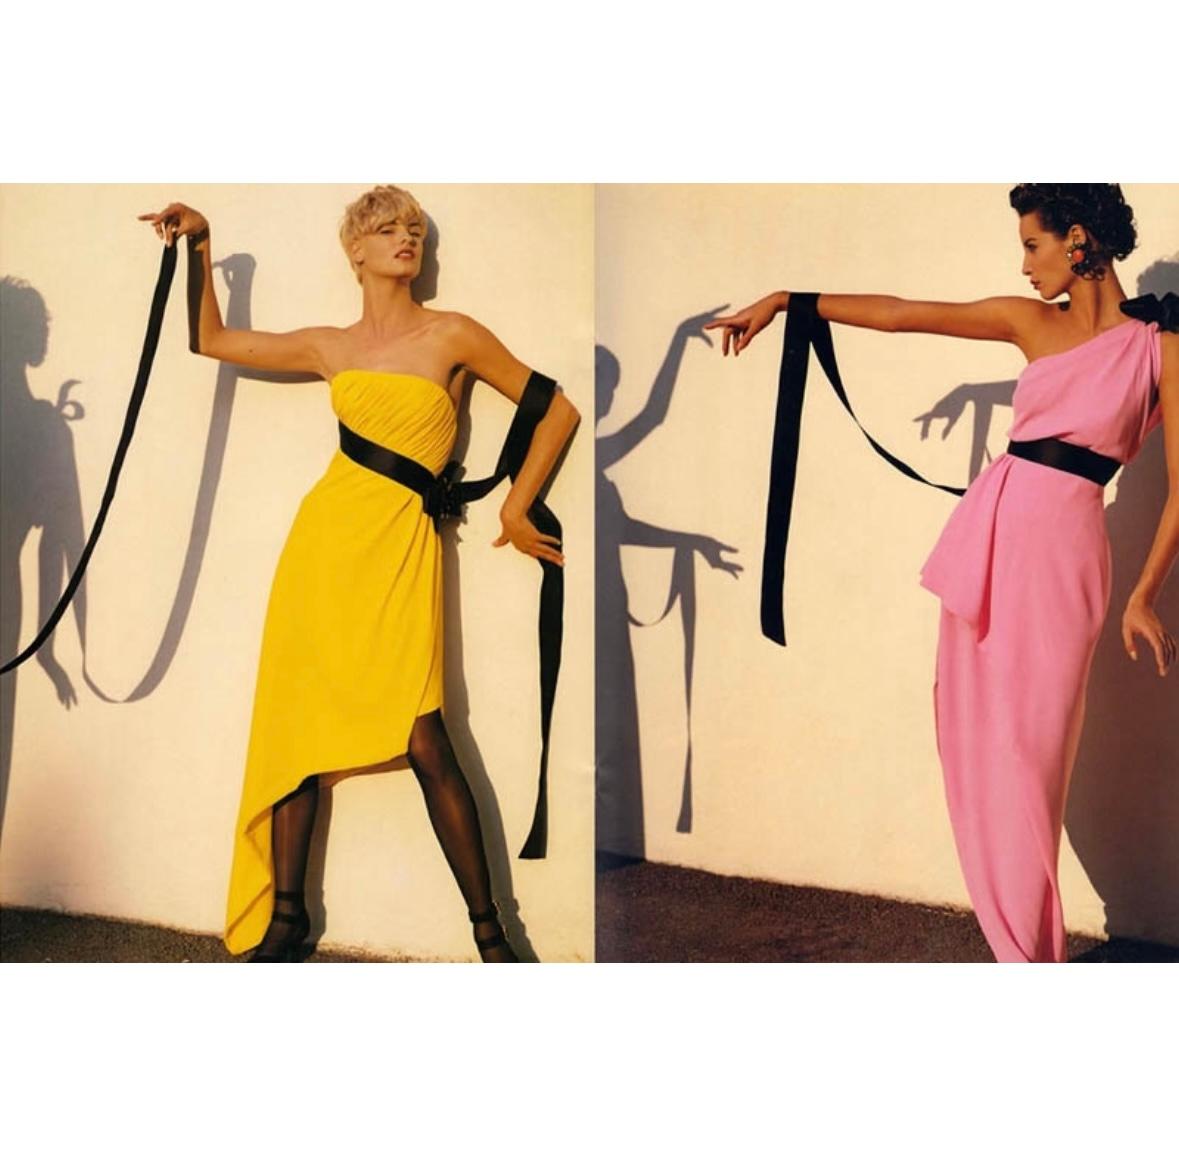 Presenting an incredible bright yellow strapless Chanel dress, designed by Karl Lagerfeld. From the Spring/Summer 1991 collection, this dress debuted on the season's runway and was also highlighted in the season's ad campaign, modeled by Linda